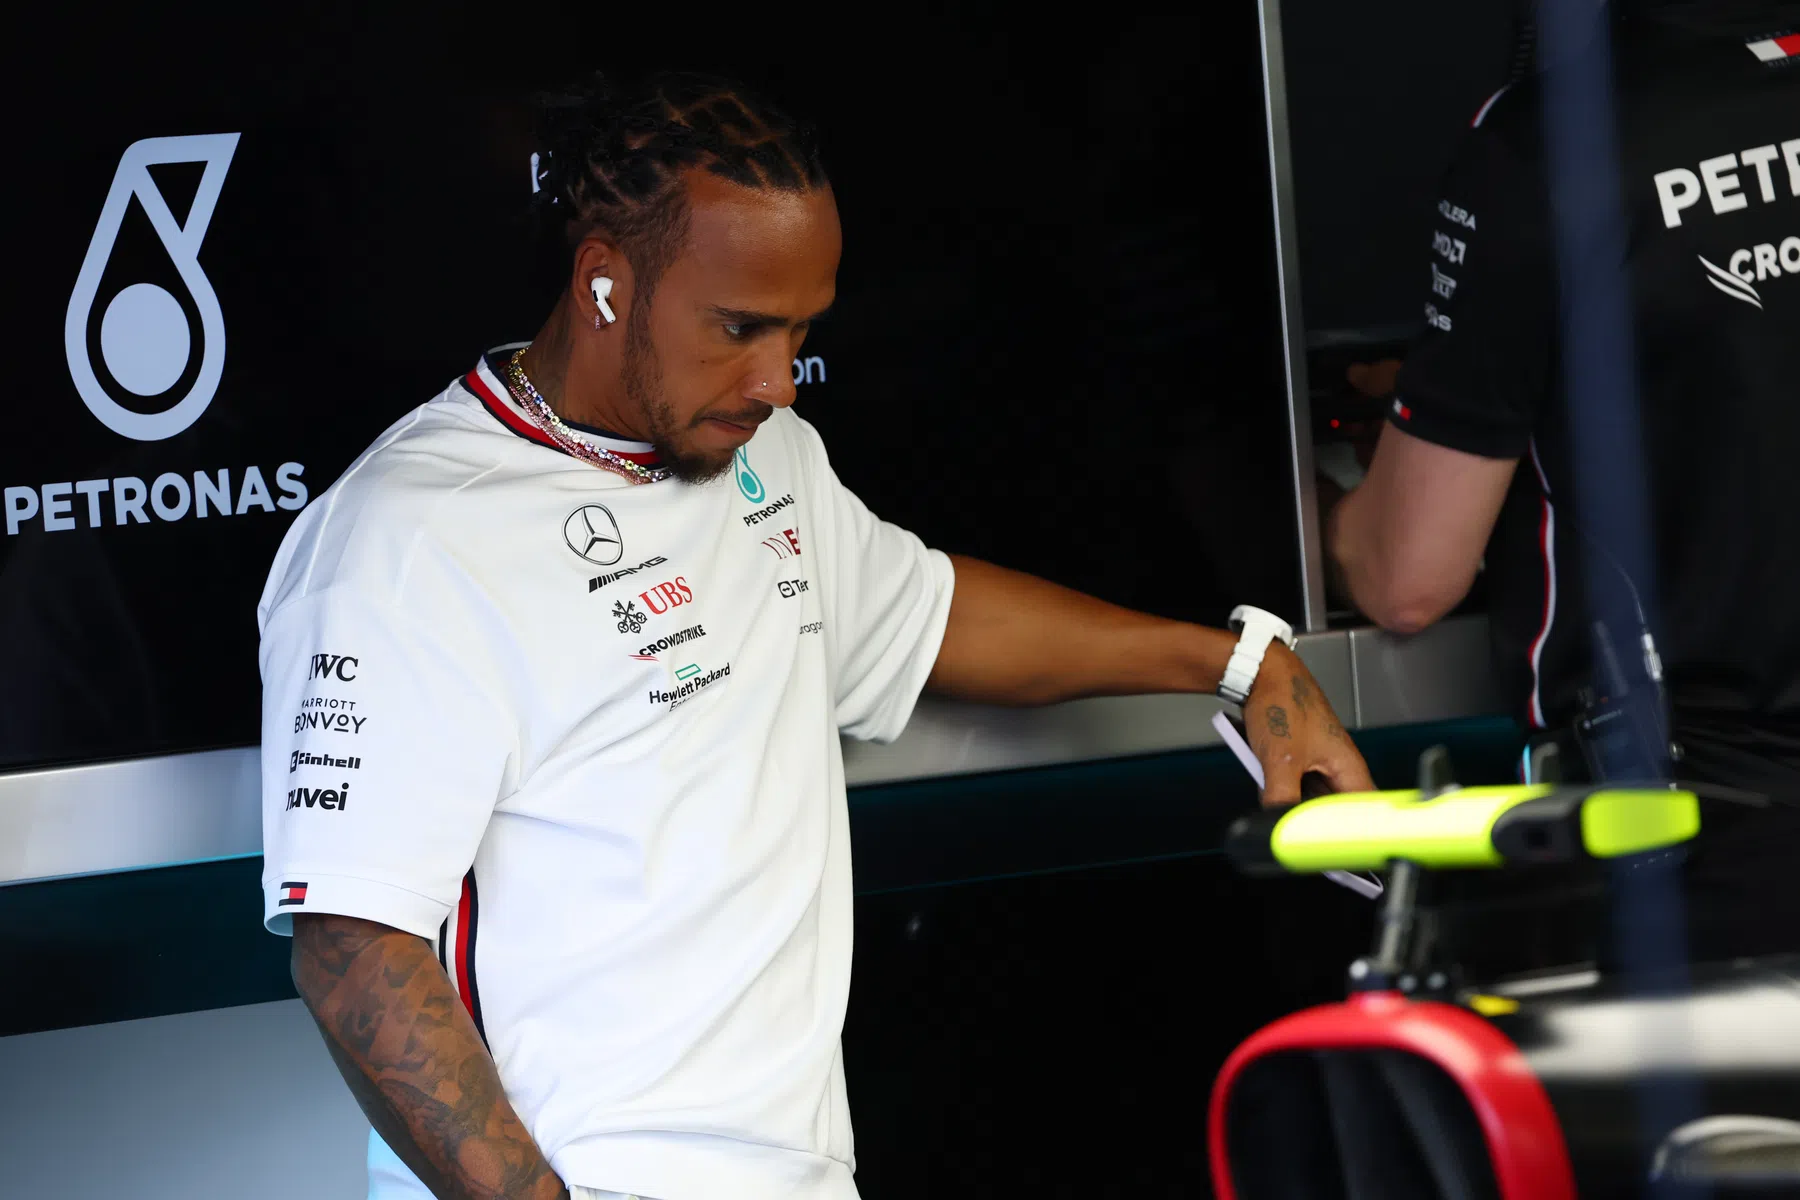 'Hamilton should have gone to Red Bull if he wants to be champion'